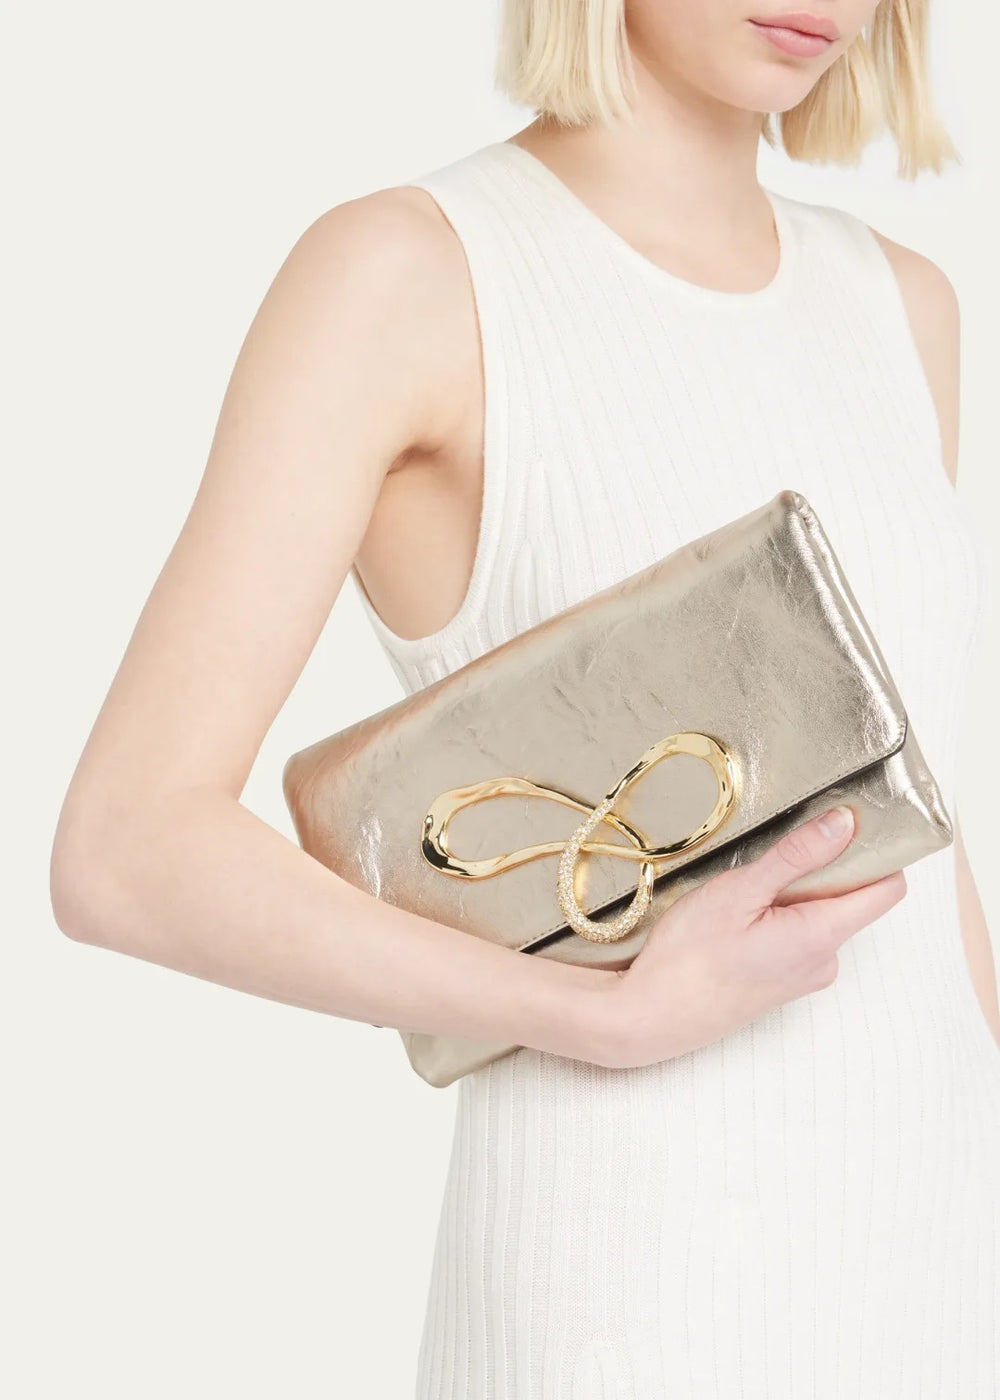 Alexis Bittar Pillow Pave Clutch - Champagne